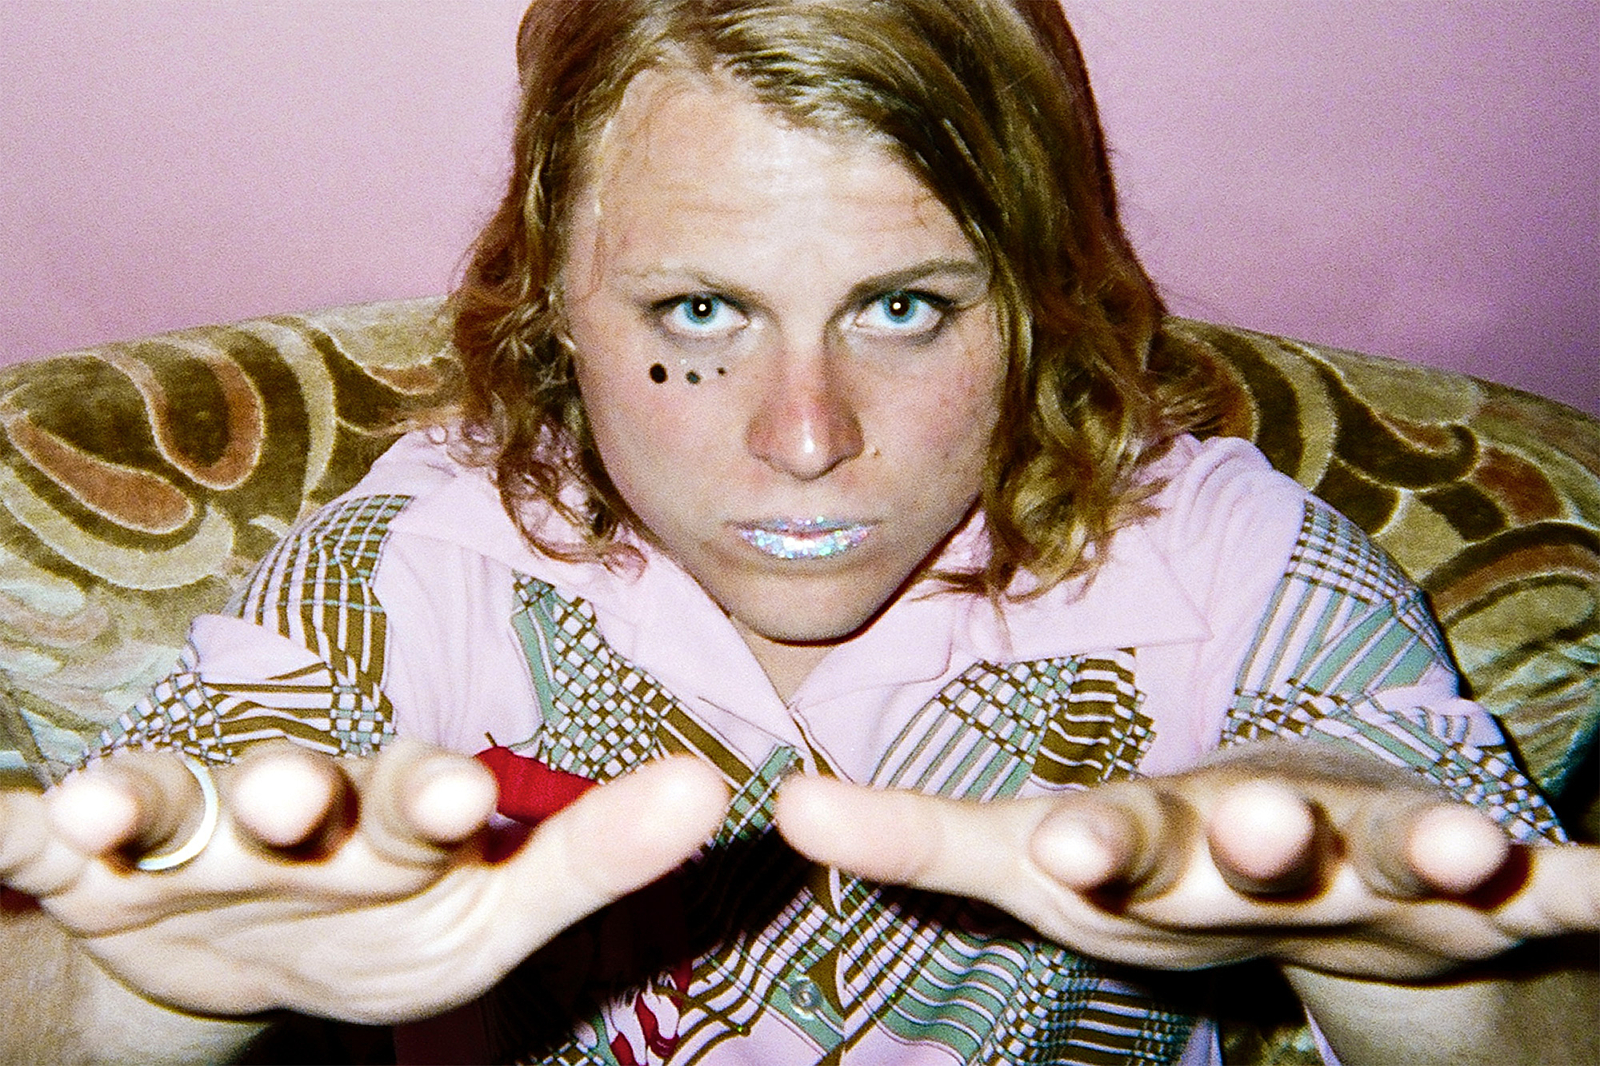 So You Think You Know... Ty Segall